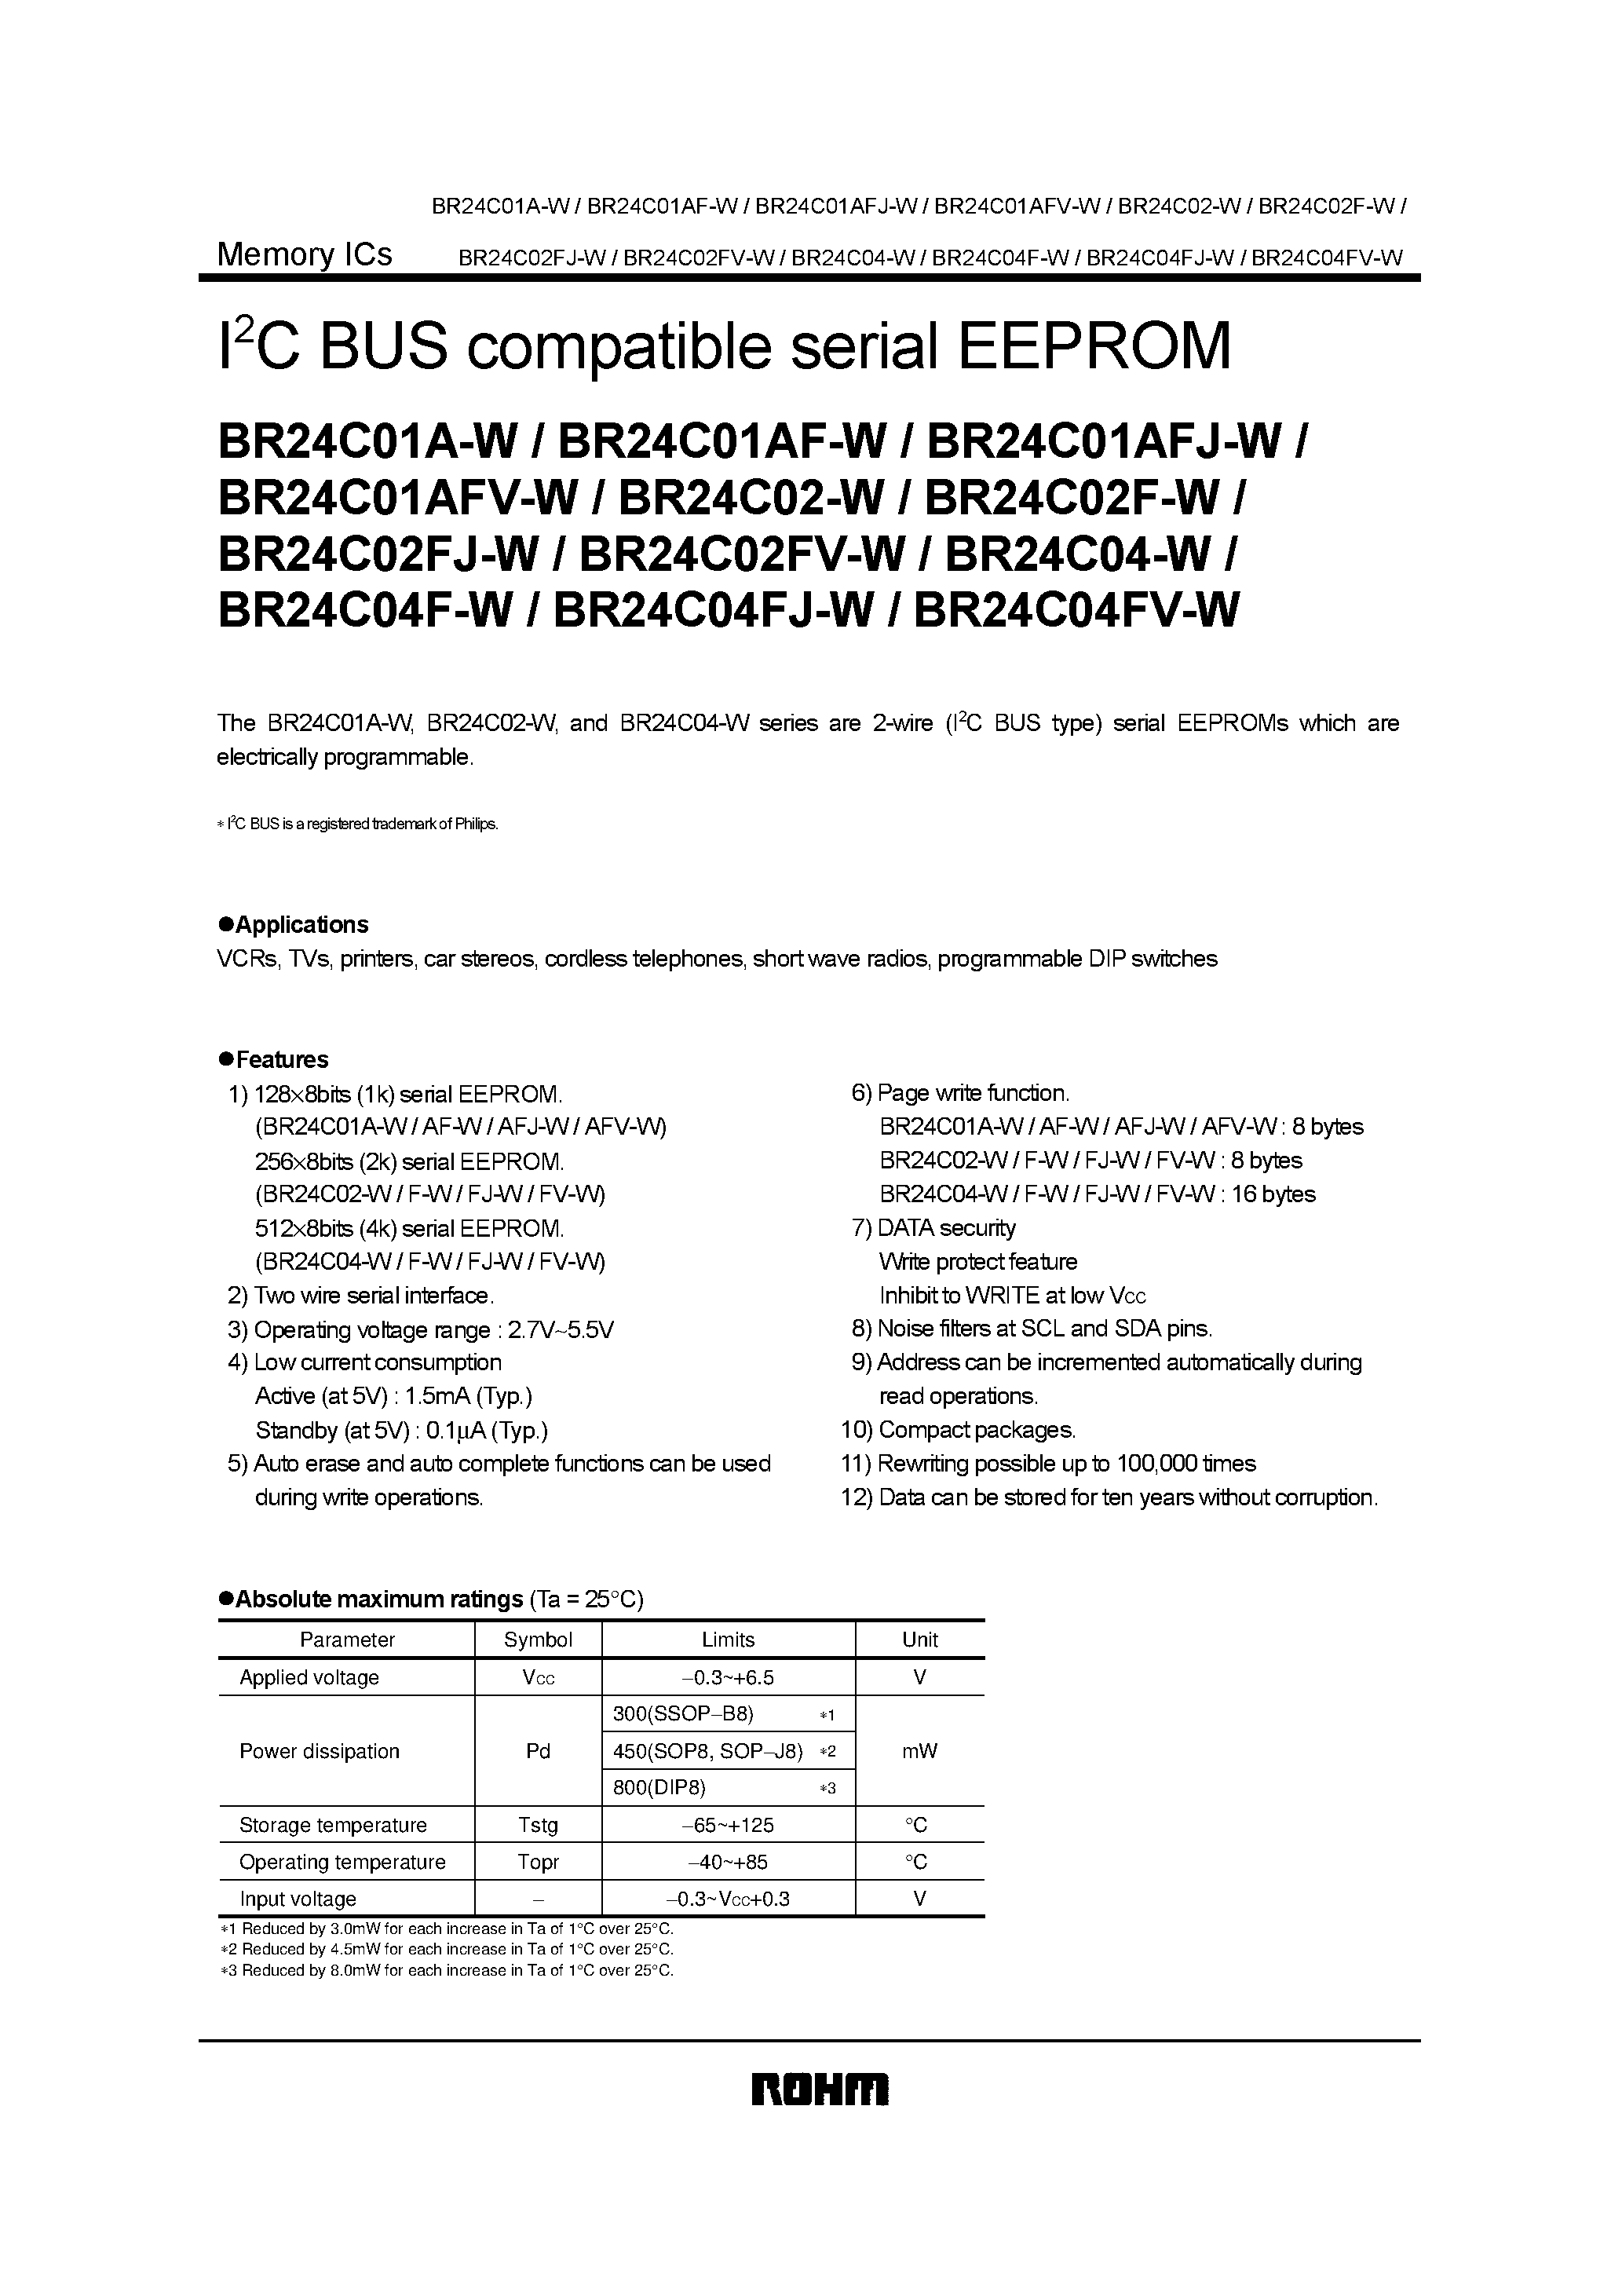 Datasheet BR24C01AFV-W - I2C BUS compatible serial EEPROM page 1